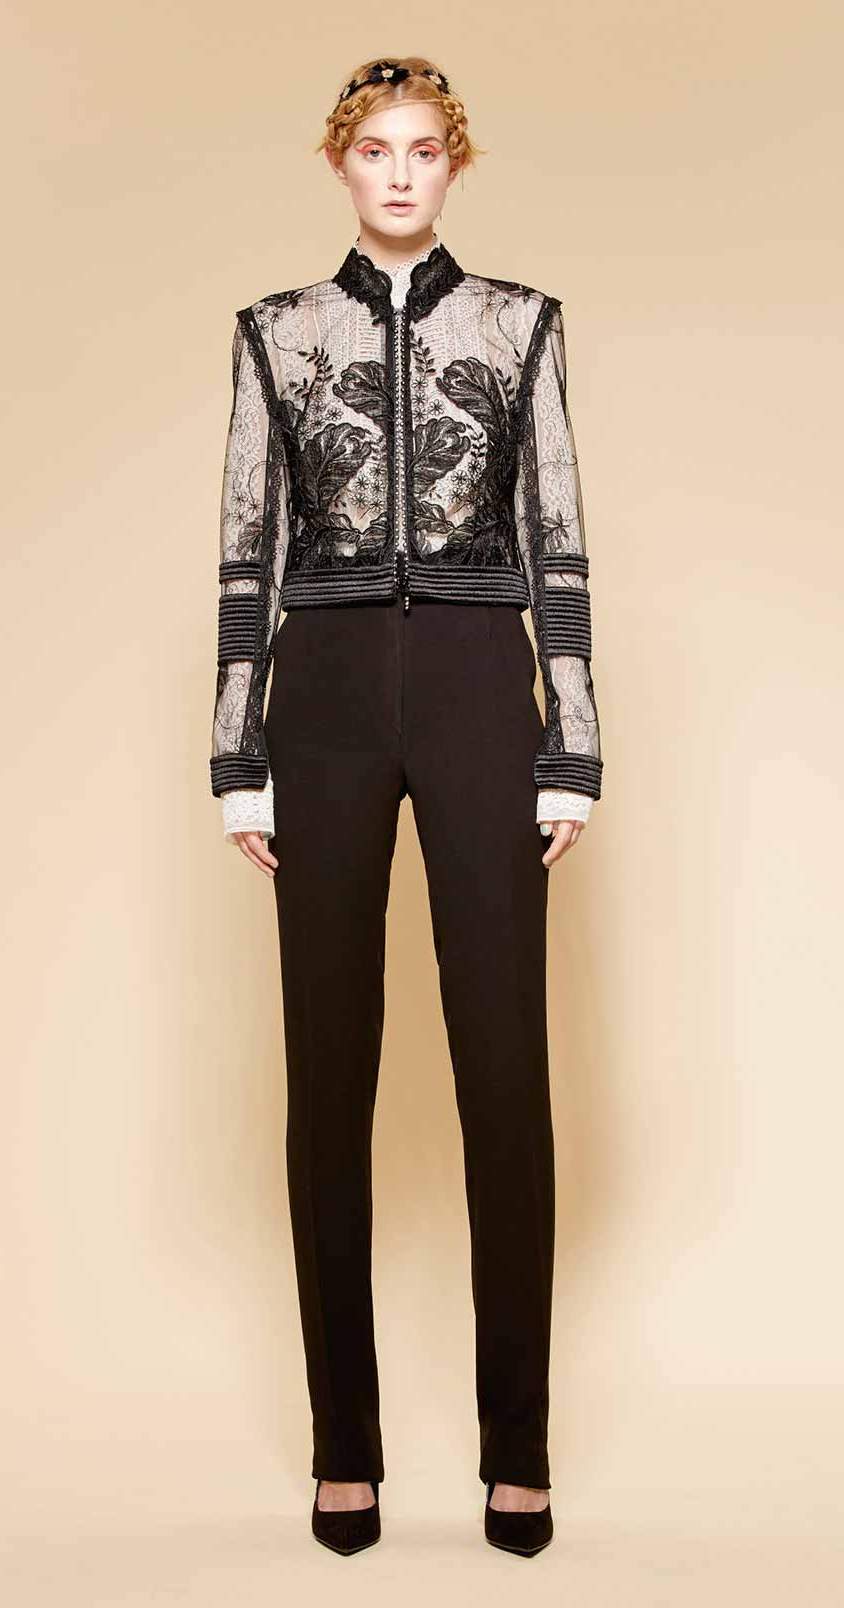 Long-sleeves white blouse, lace, silk guipure and embroidered silk tulle black jacket